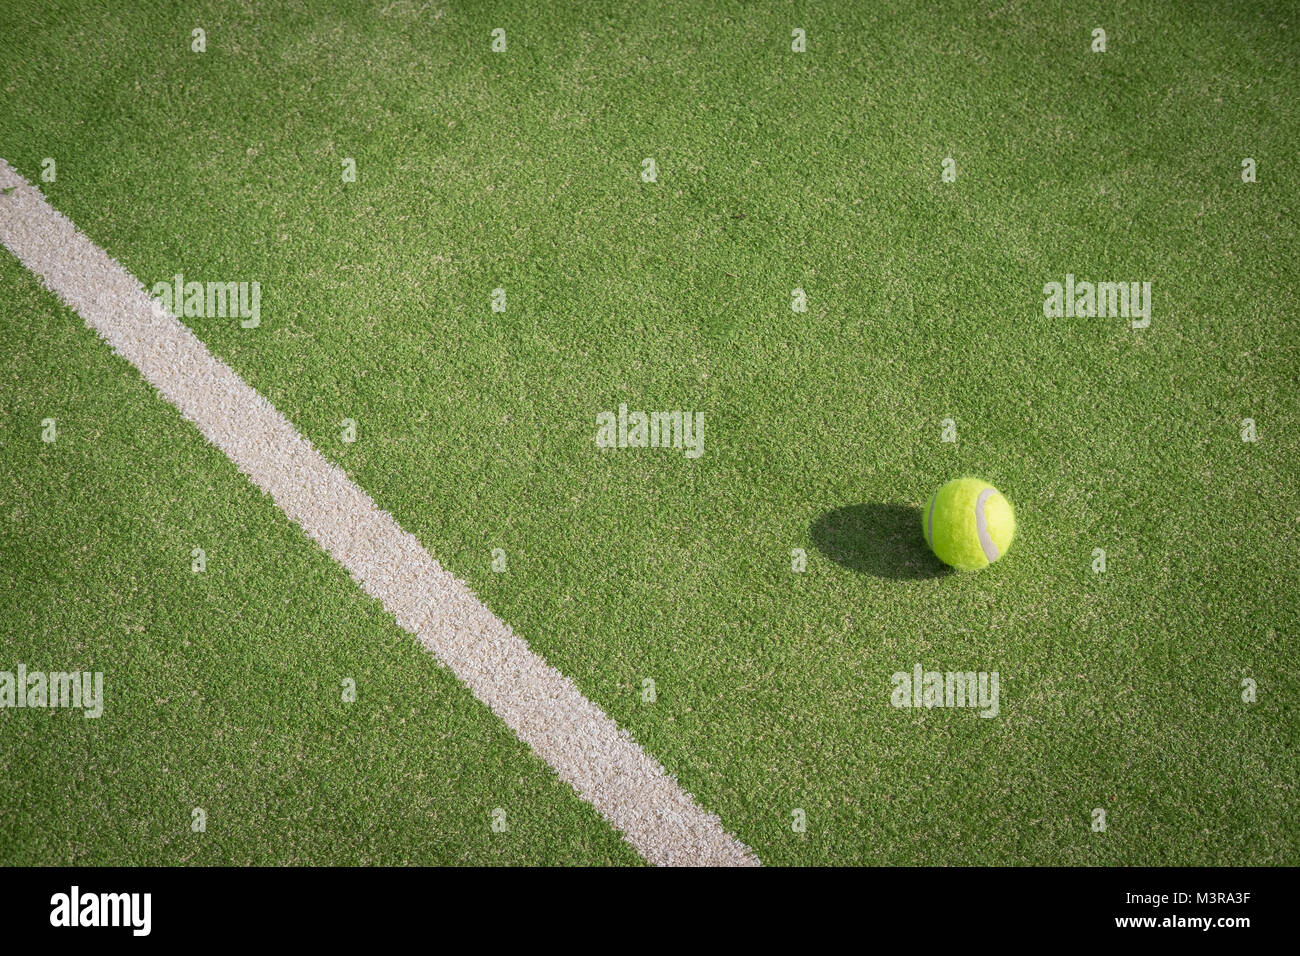 Paddle tennis court and ball Stock Photo